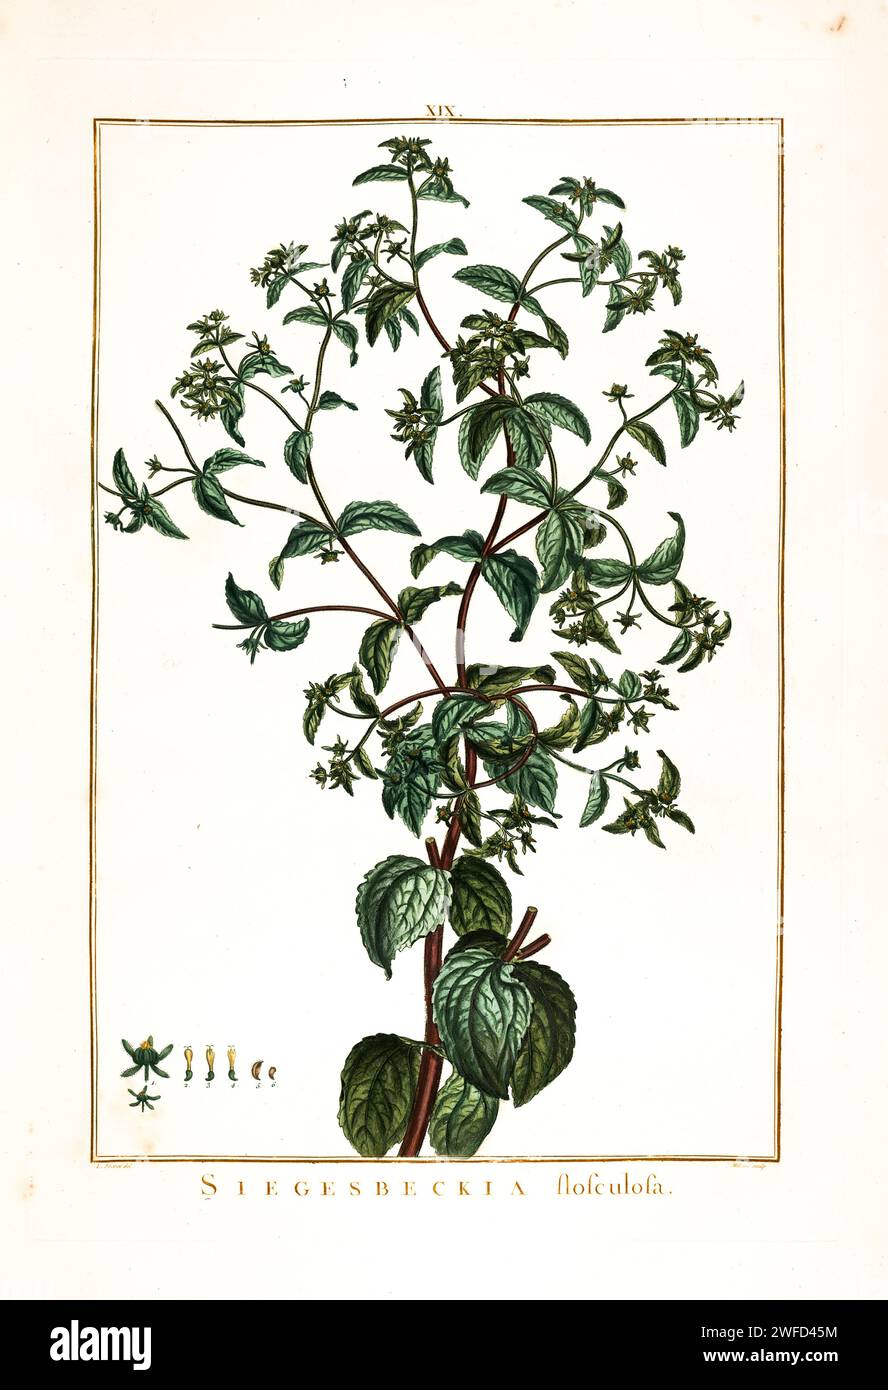 Sigesbeckia is a genus of annual plants in the family Asteraceae. St. Paul's wort is a common name for some of the species. Sigesbeckia is widely distributed and has been traditionally used for the management of chronic diseases, including arthritis. Hand Painted by Pierre-Joseph Redouté in 1784 Stock Photo